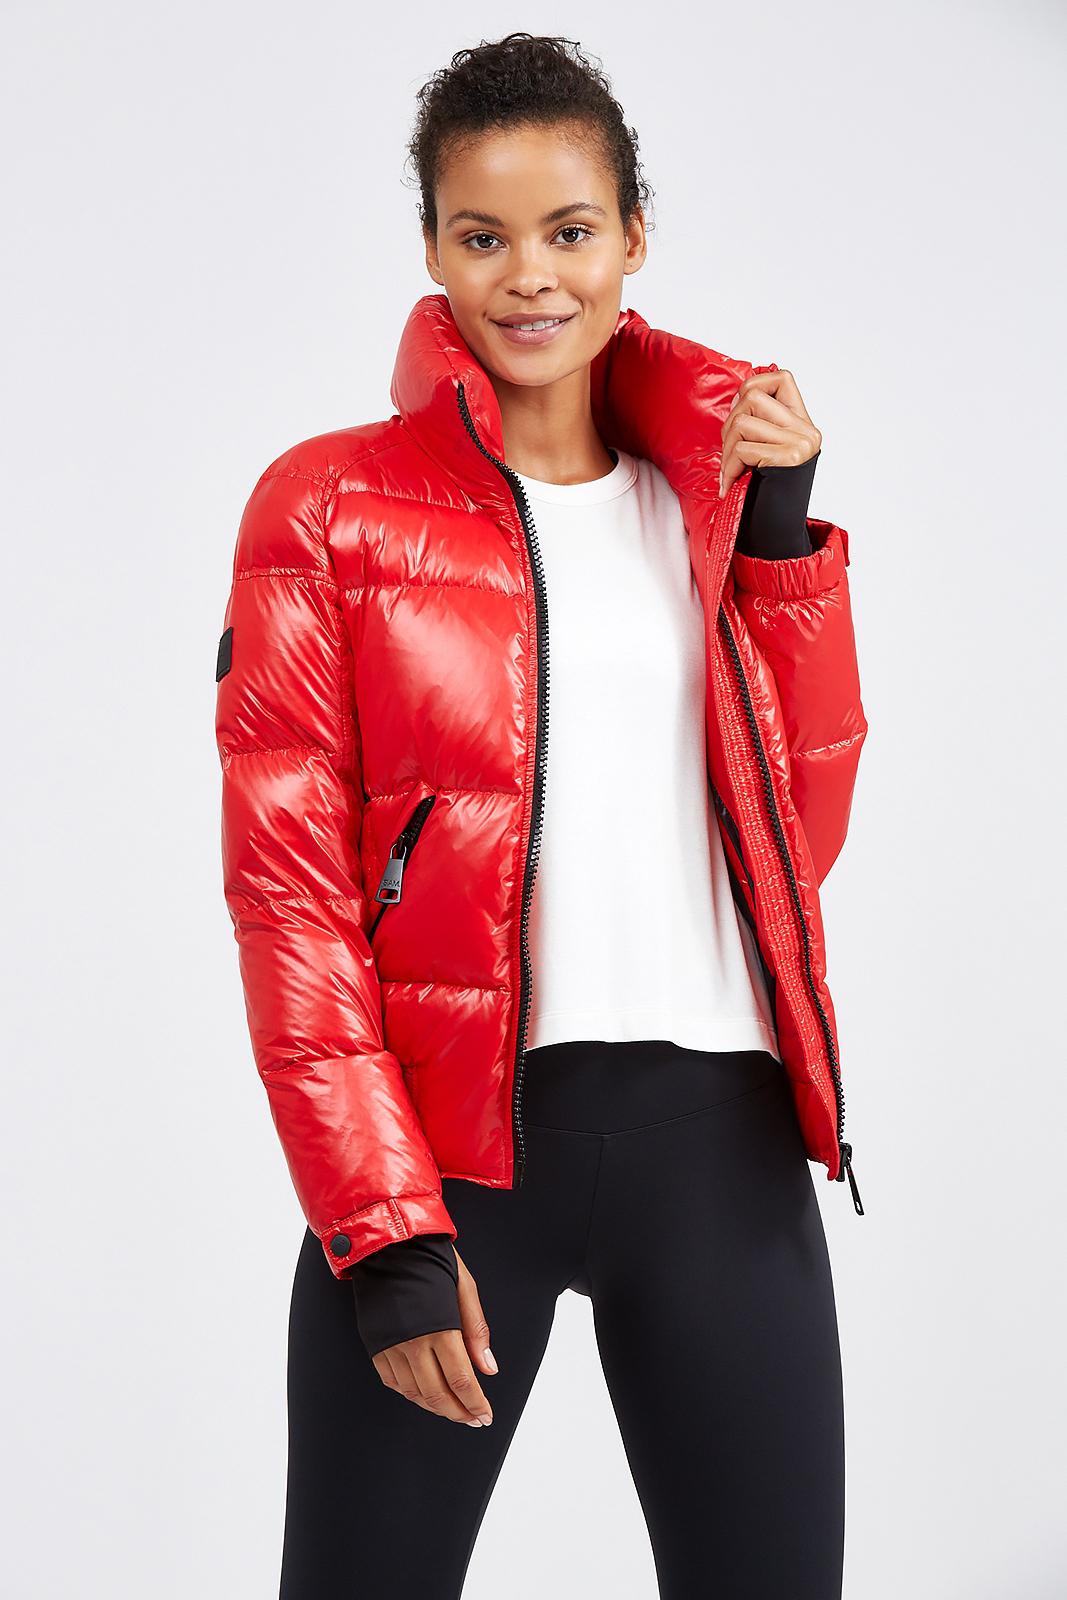 Lyst - Sam. Freestyle Bomber Jacket in Red